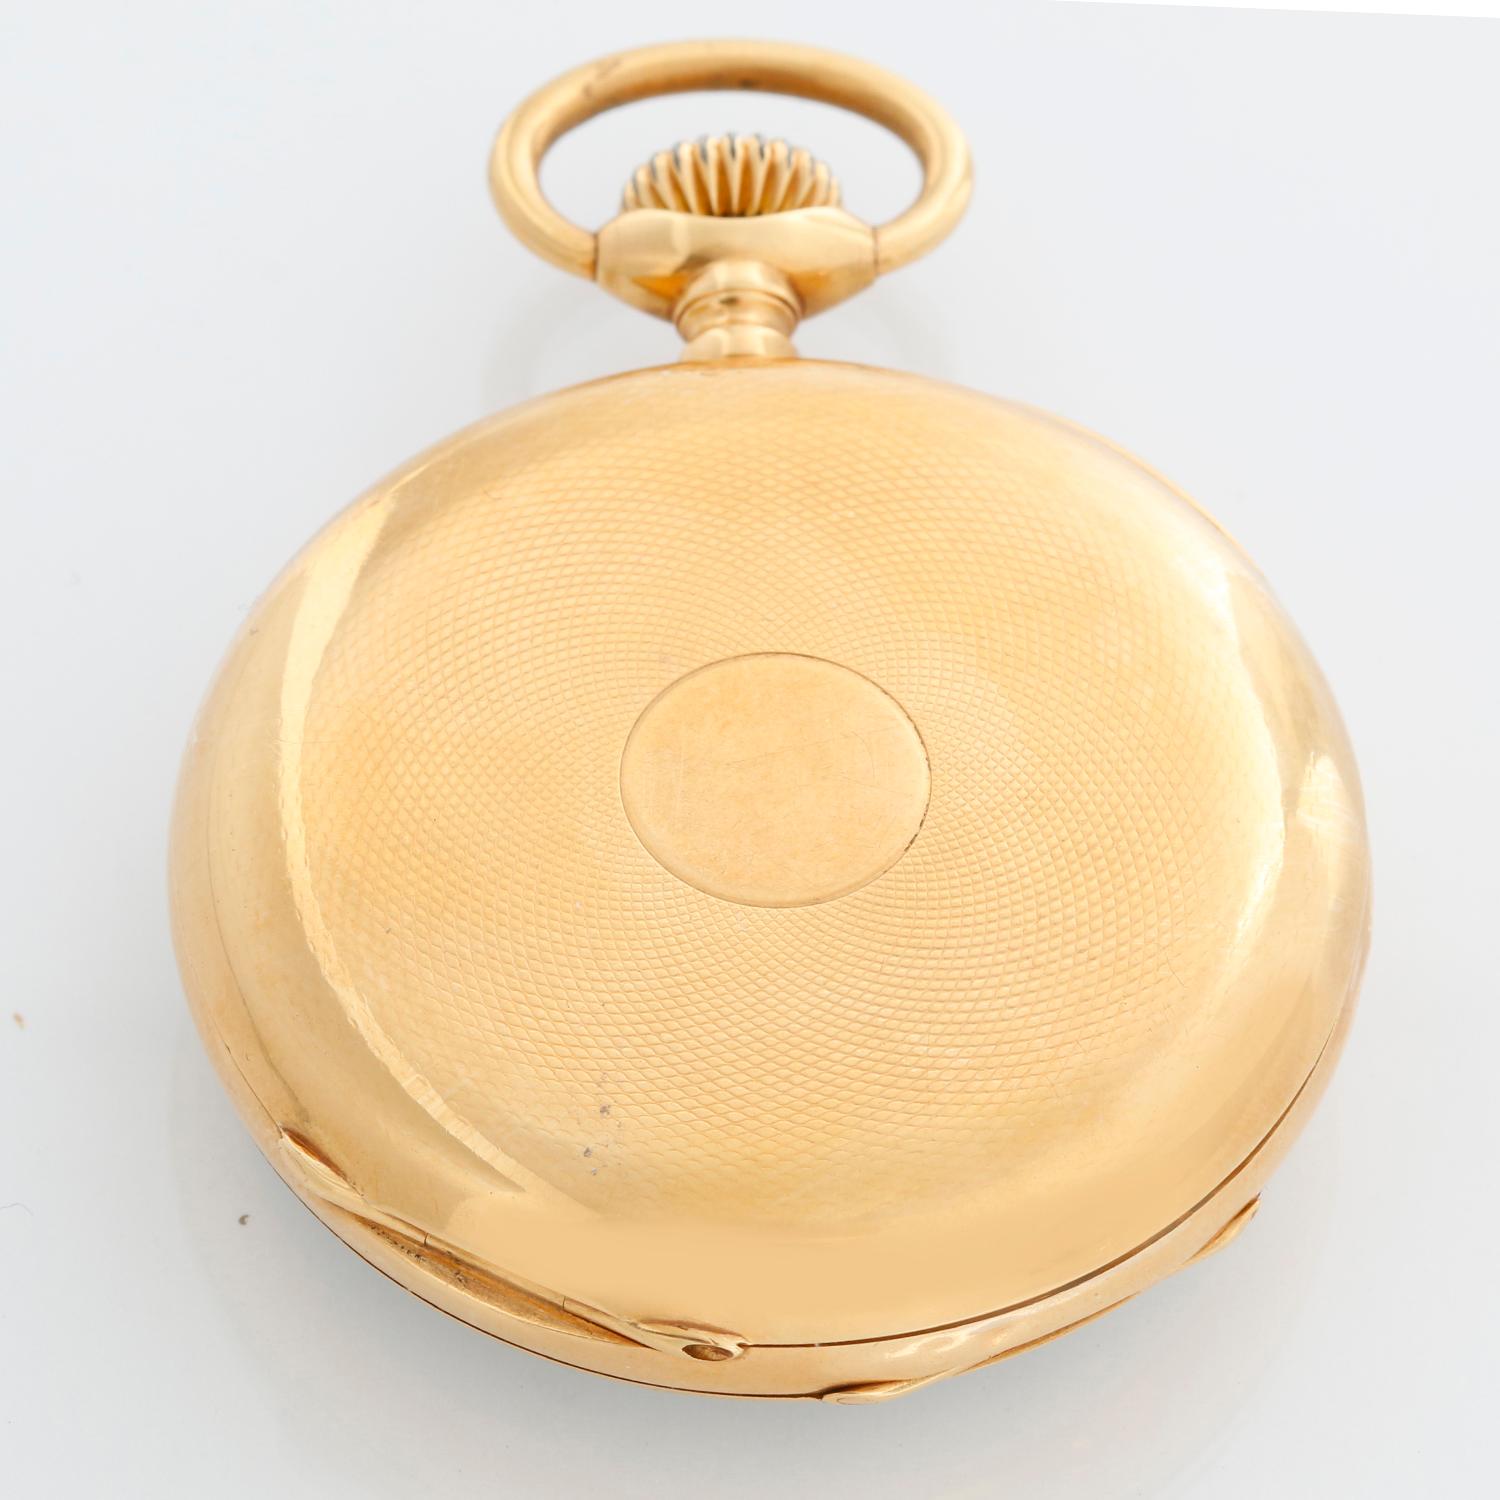 Vintage Patek Philippe Gondolo 18k Yellow Gold Open Face Pocket Watch - Manual winding. Huge 18k yellow case with very unique raised design on case back  (52mm diameter). Single sunk dial porcelain with black Roman numerals. Pre-owned, vintage Patek